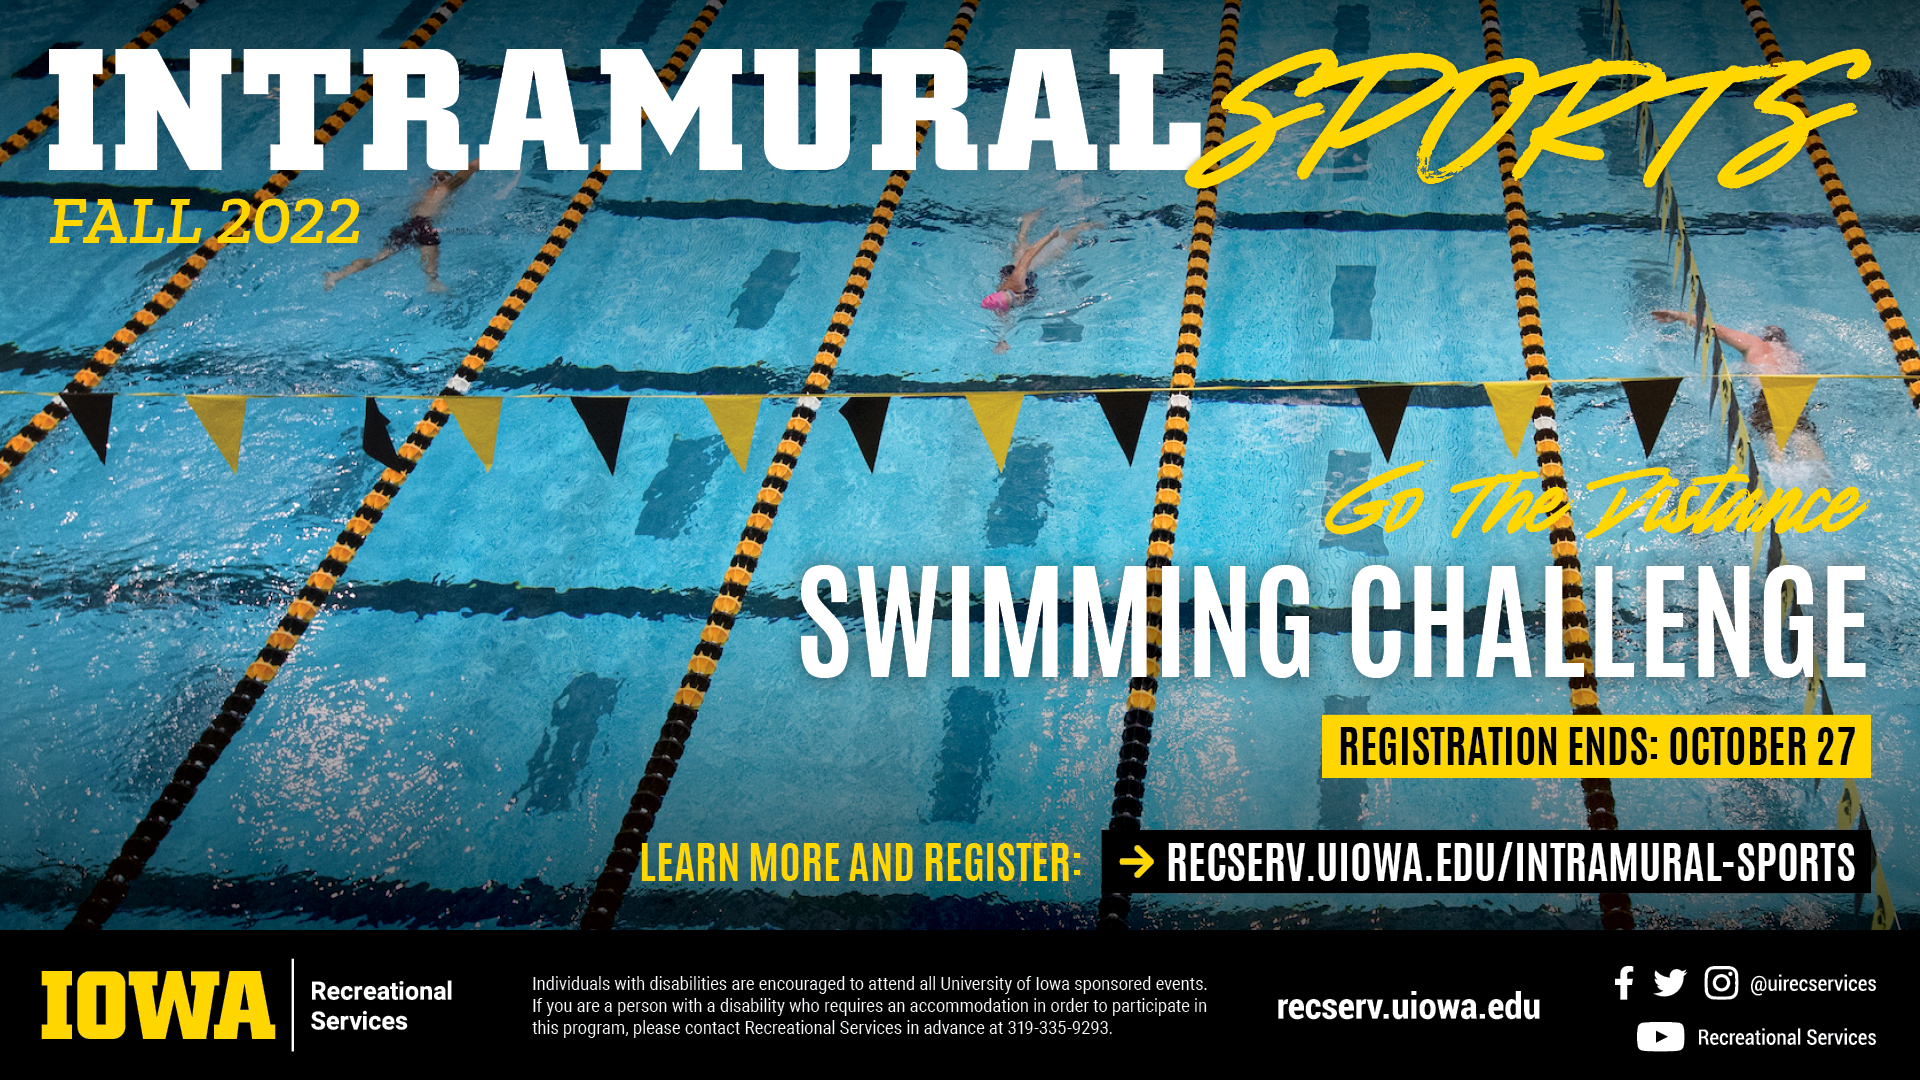 Intramural Sports Fall 2022: Swimming Challenge. Learn more and register at reserv.uiowa.edu/intramural-sports